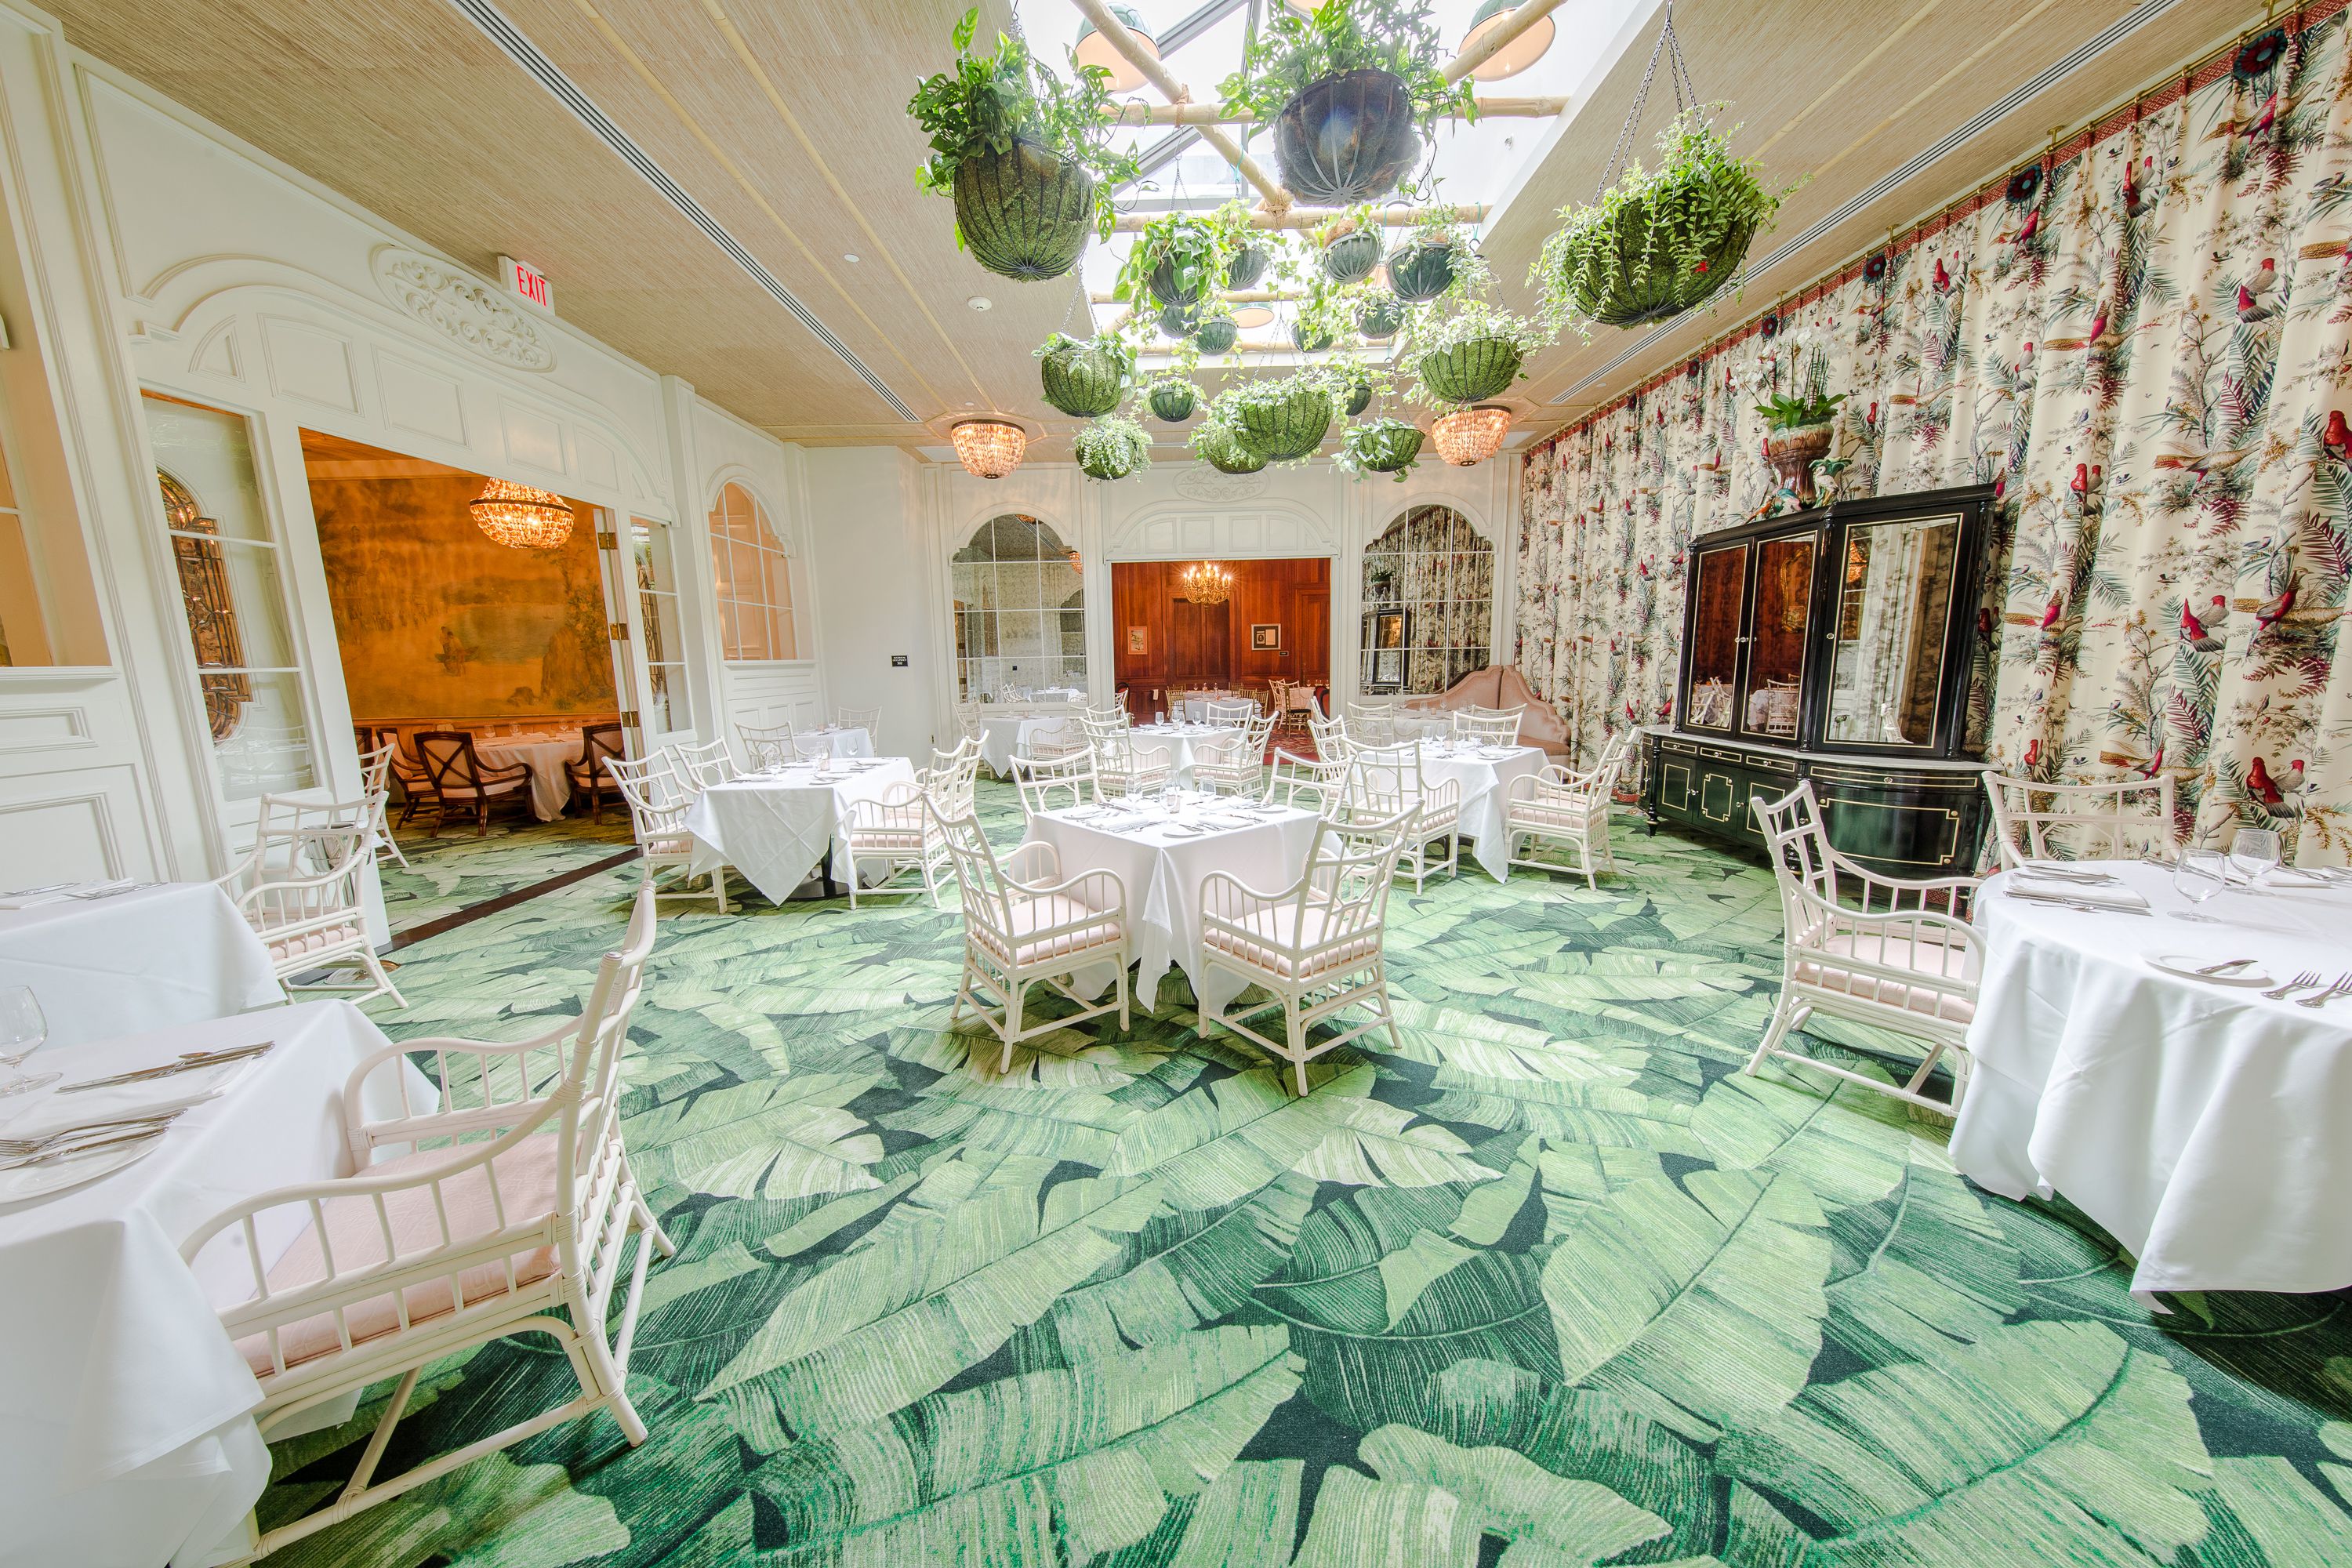 Inside The Caribbean Room, Besh's Ode to Classic Creole - Eater New Orleans